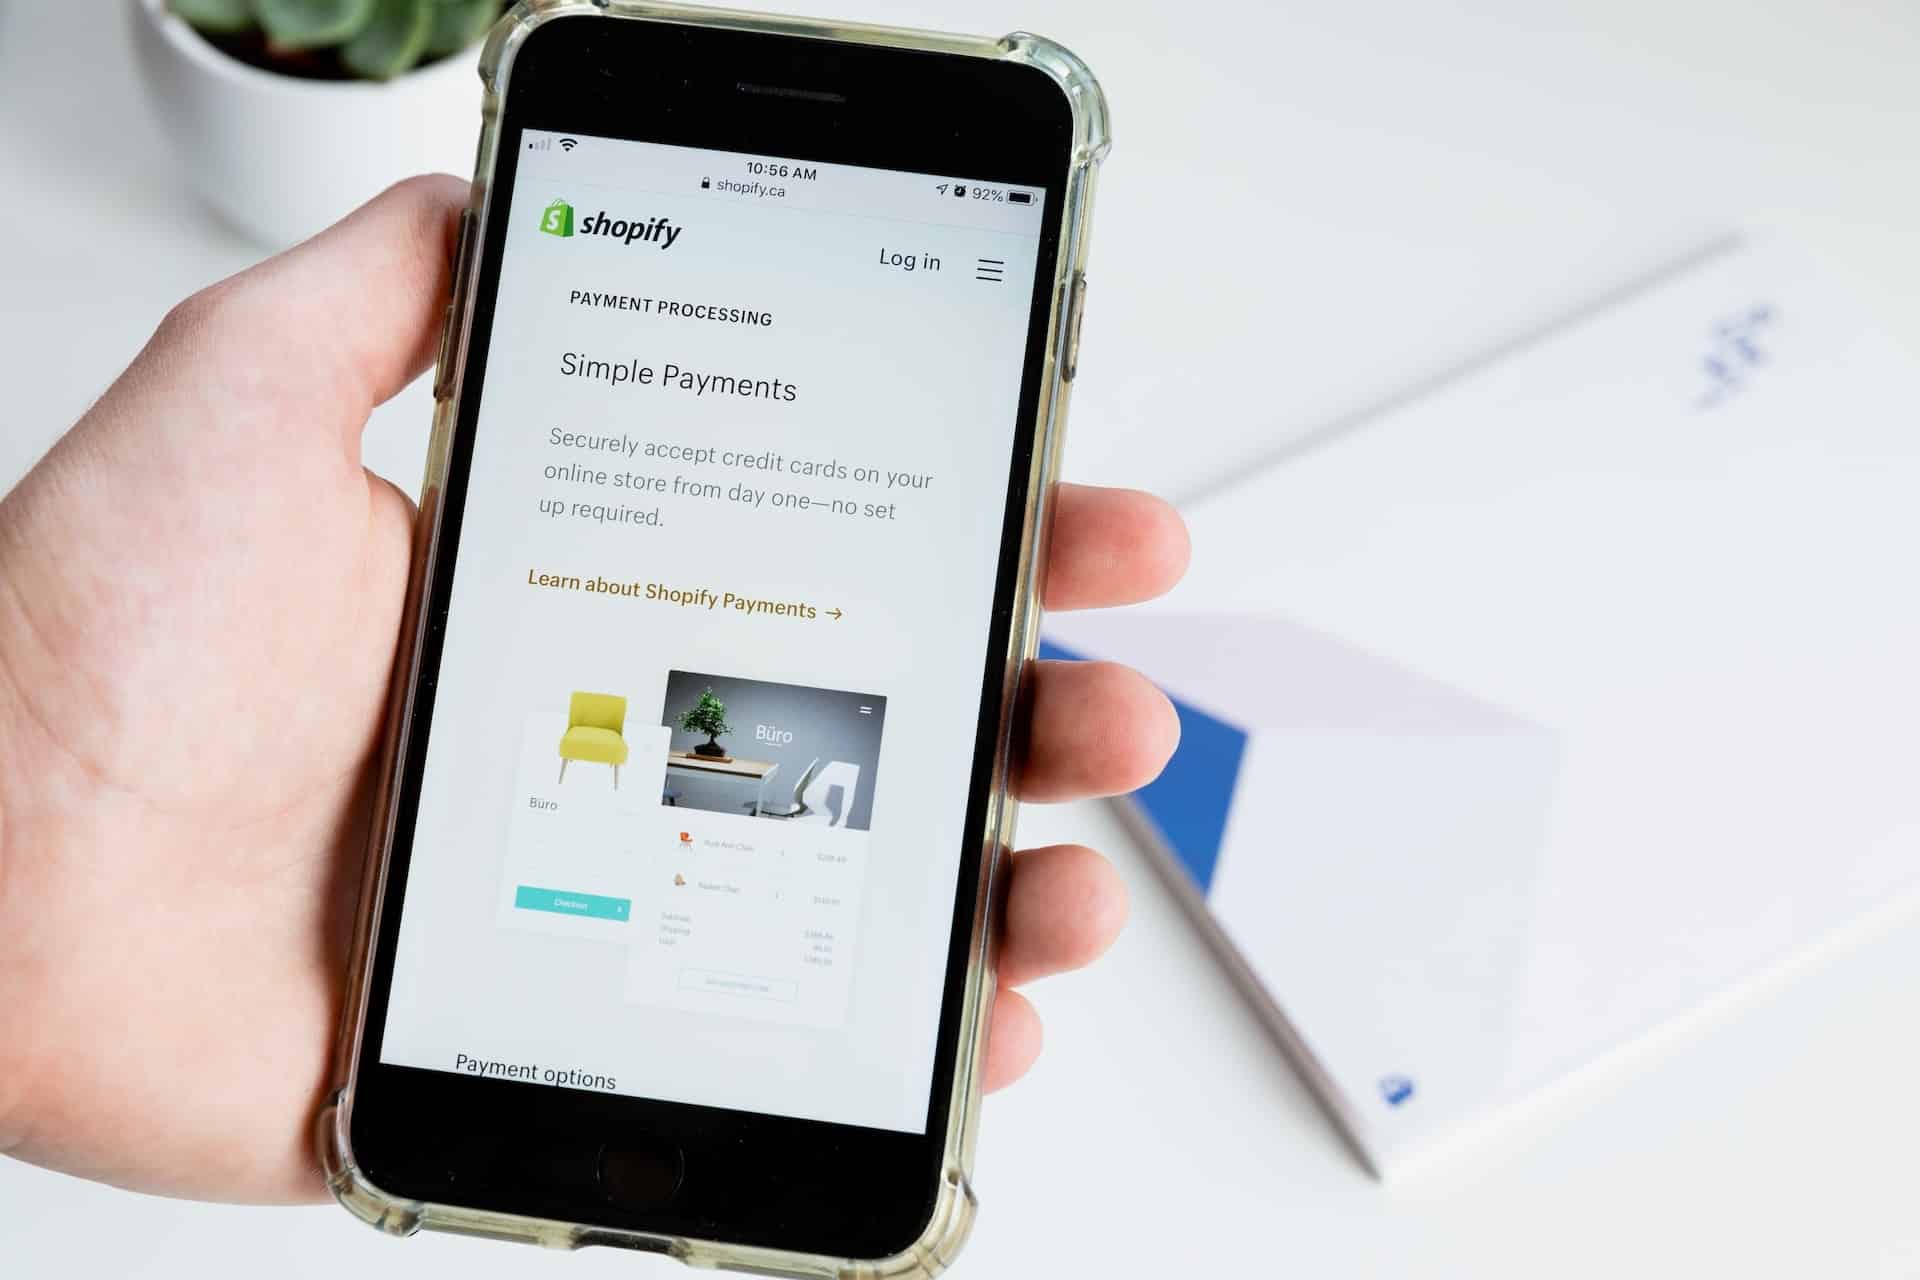 Deconstructing Shopify’s Business Model Featured Image by Roberto Cortese